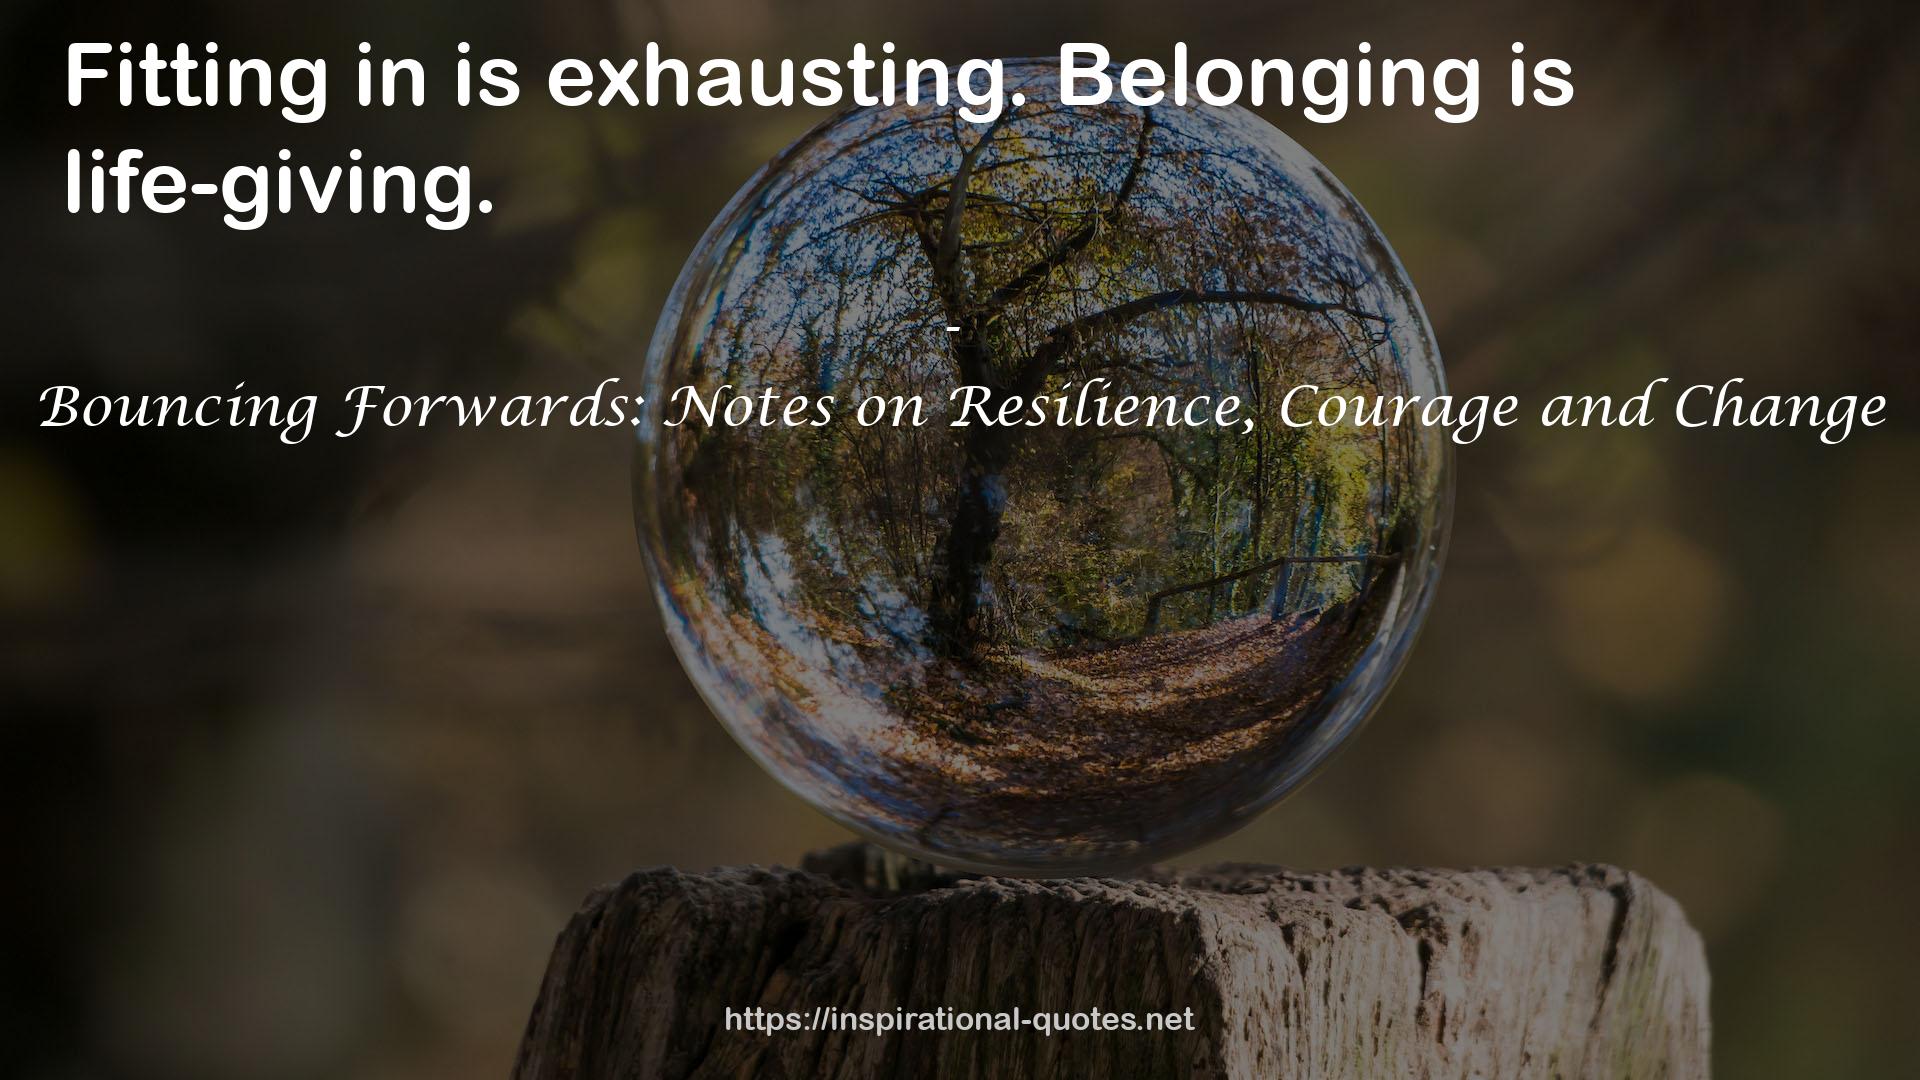 Bouncing Forwards: Notes on Resilience, Courage and Change QUOTES